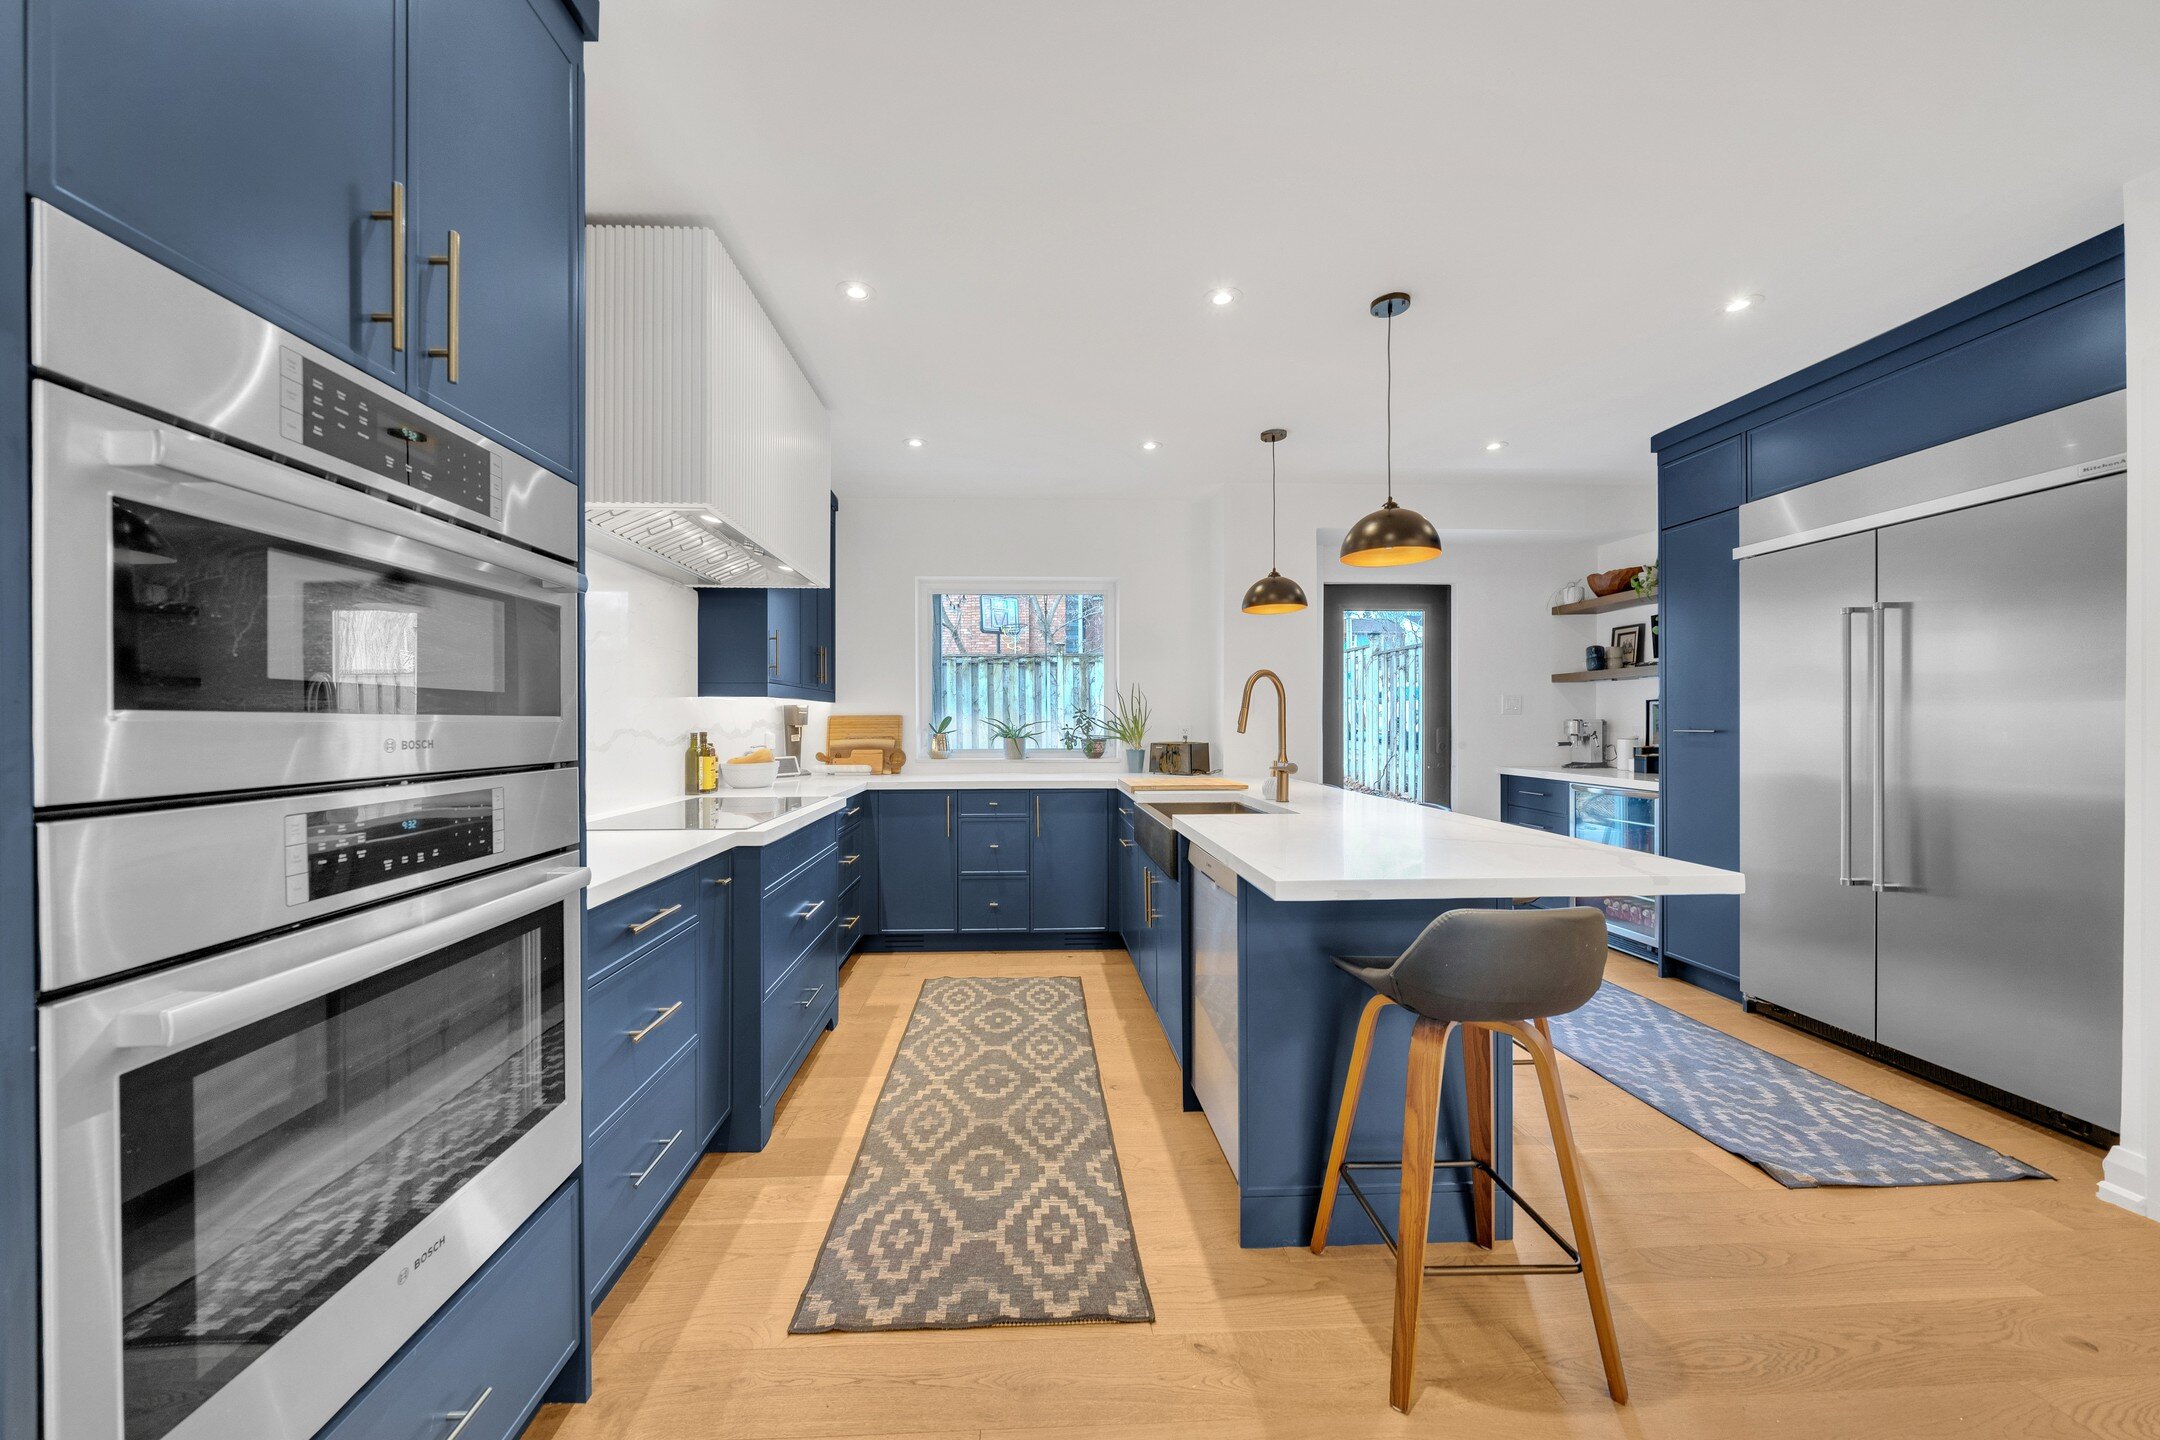 This modern Boho kitchen features vibrant blue cabinets and light wood tones, accented with sleek, stainless steel appliances. A white countertop island provides extra workspace and seating, complemented by stylish stools. Patterned rugs and industri